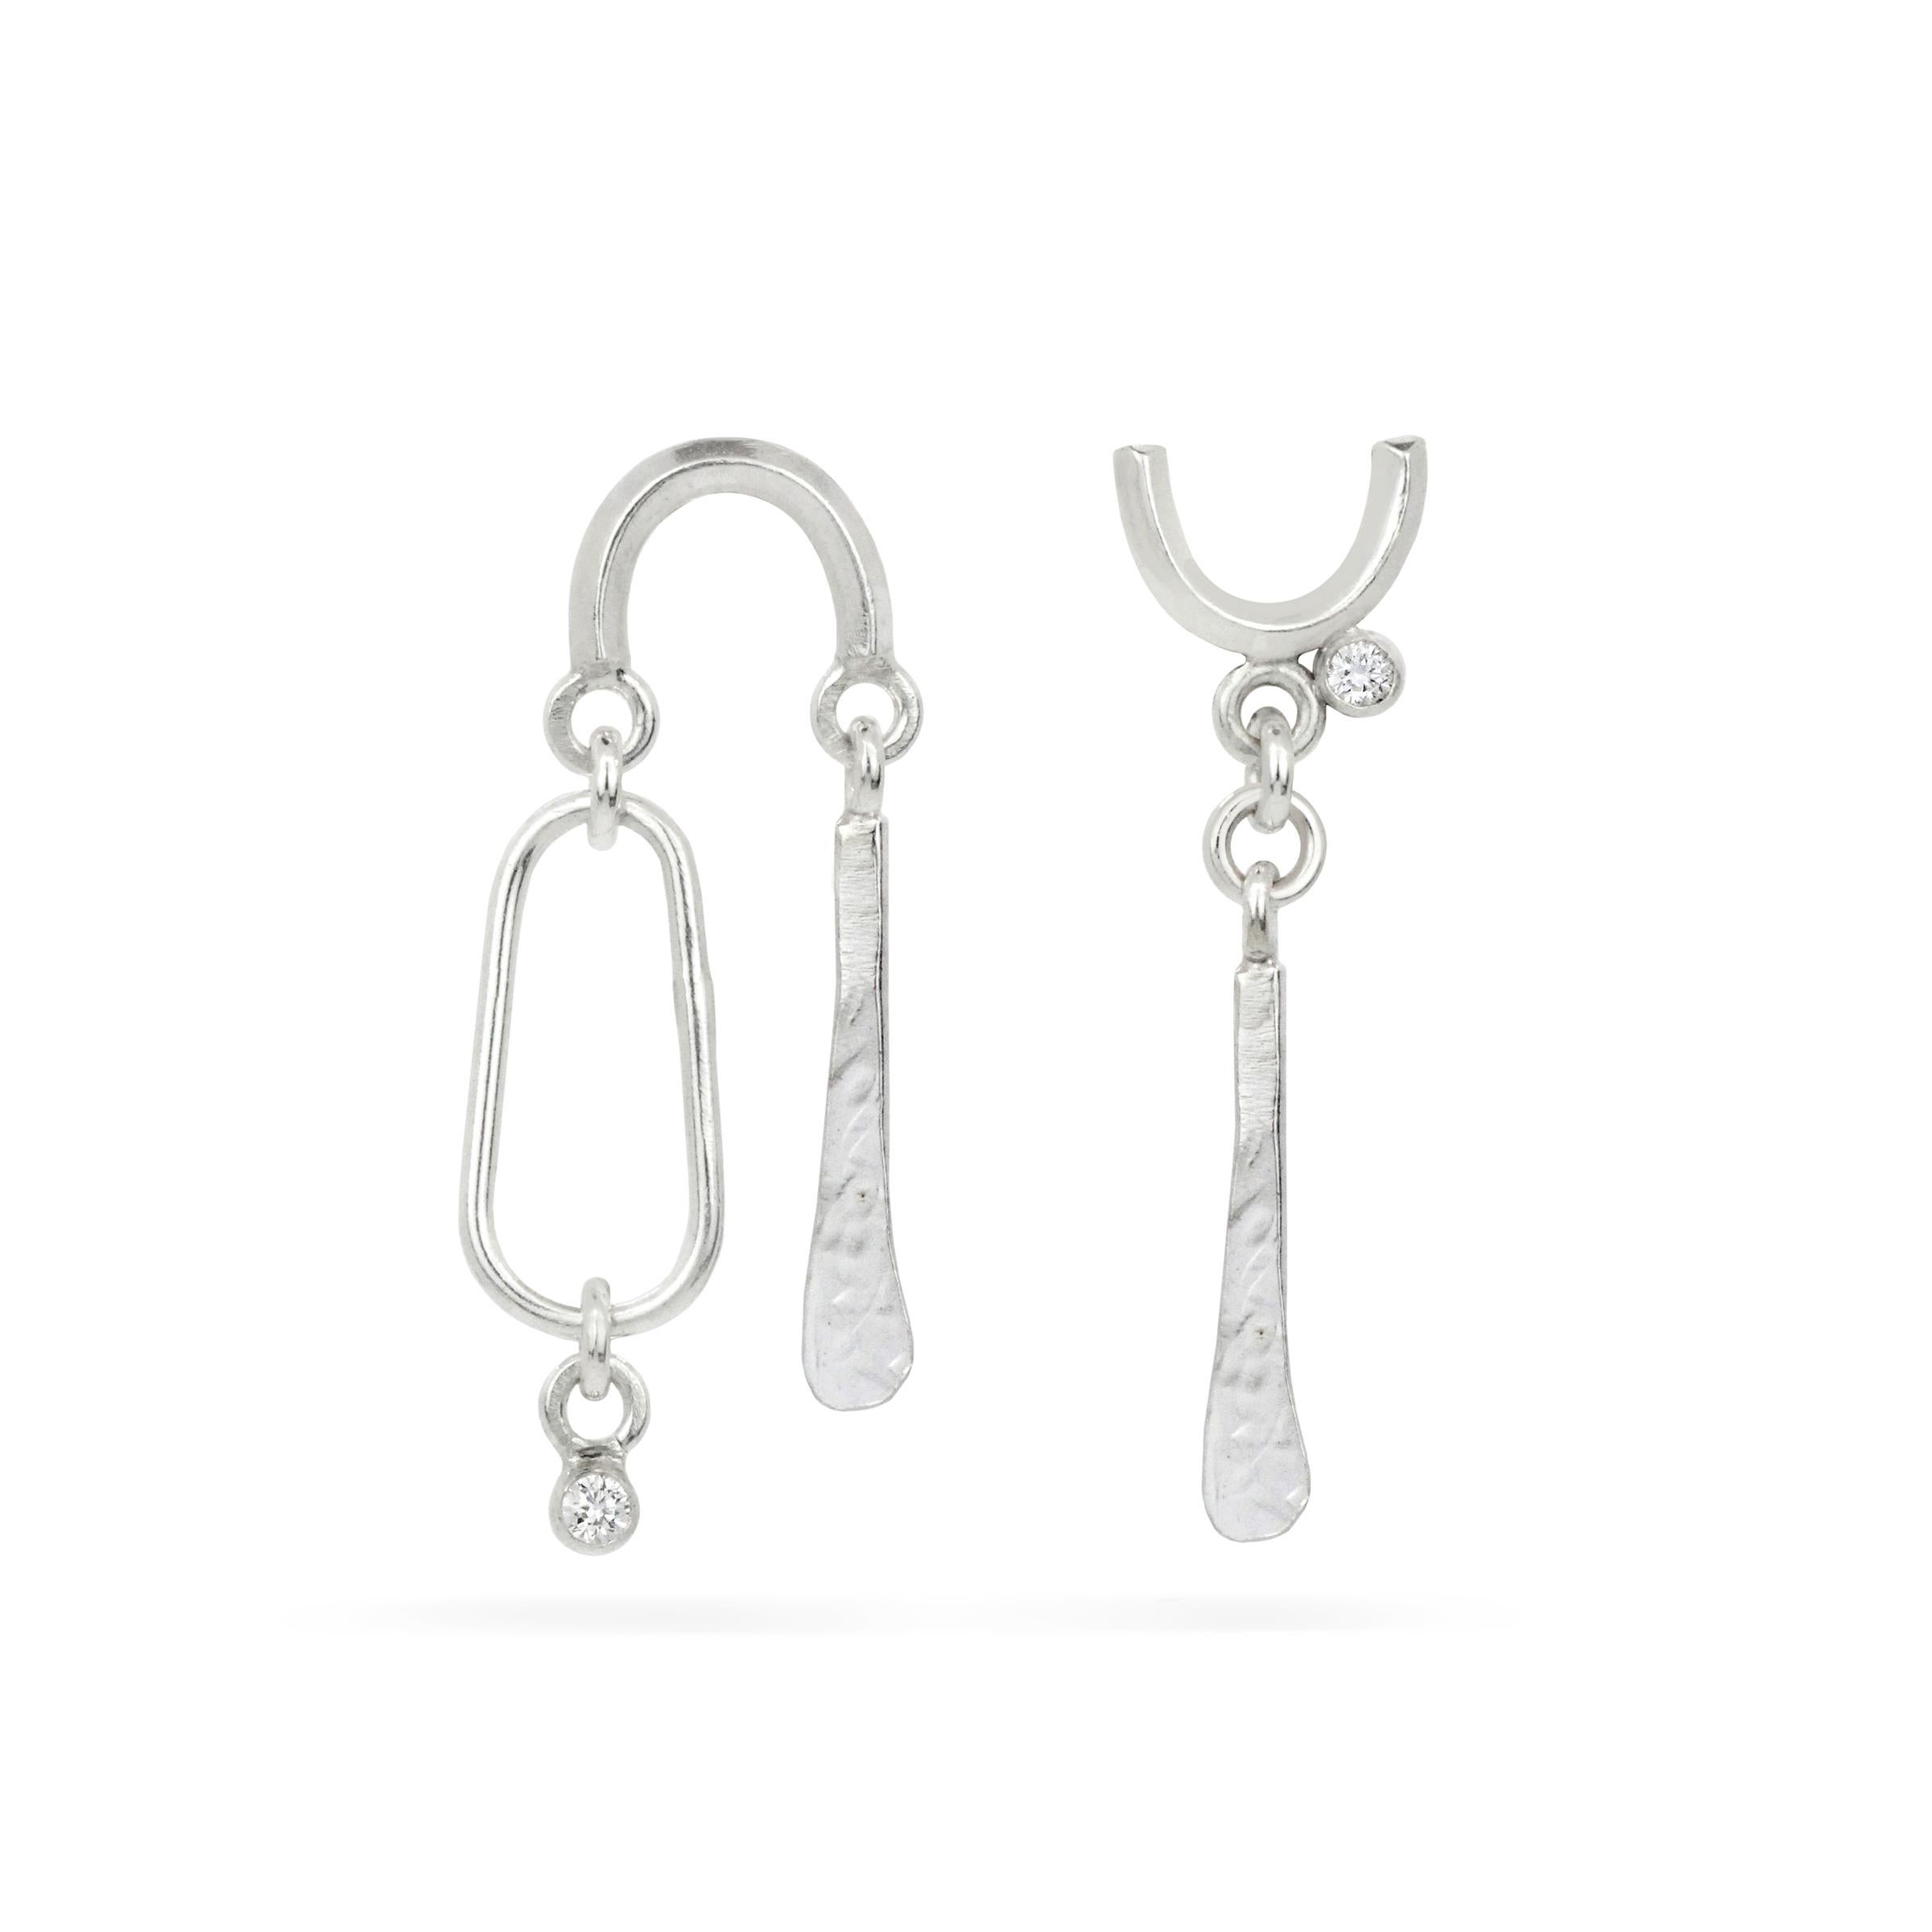 Sterling Silver/Lab-Grown White Sapphires Ari & Amal Drop Earrings by Cindy Liebel Jewelry</p>

Create your earring story with this duo, these post-drop earrings with geometric shapes are accented with tiny faceted gems and add an element of